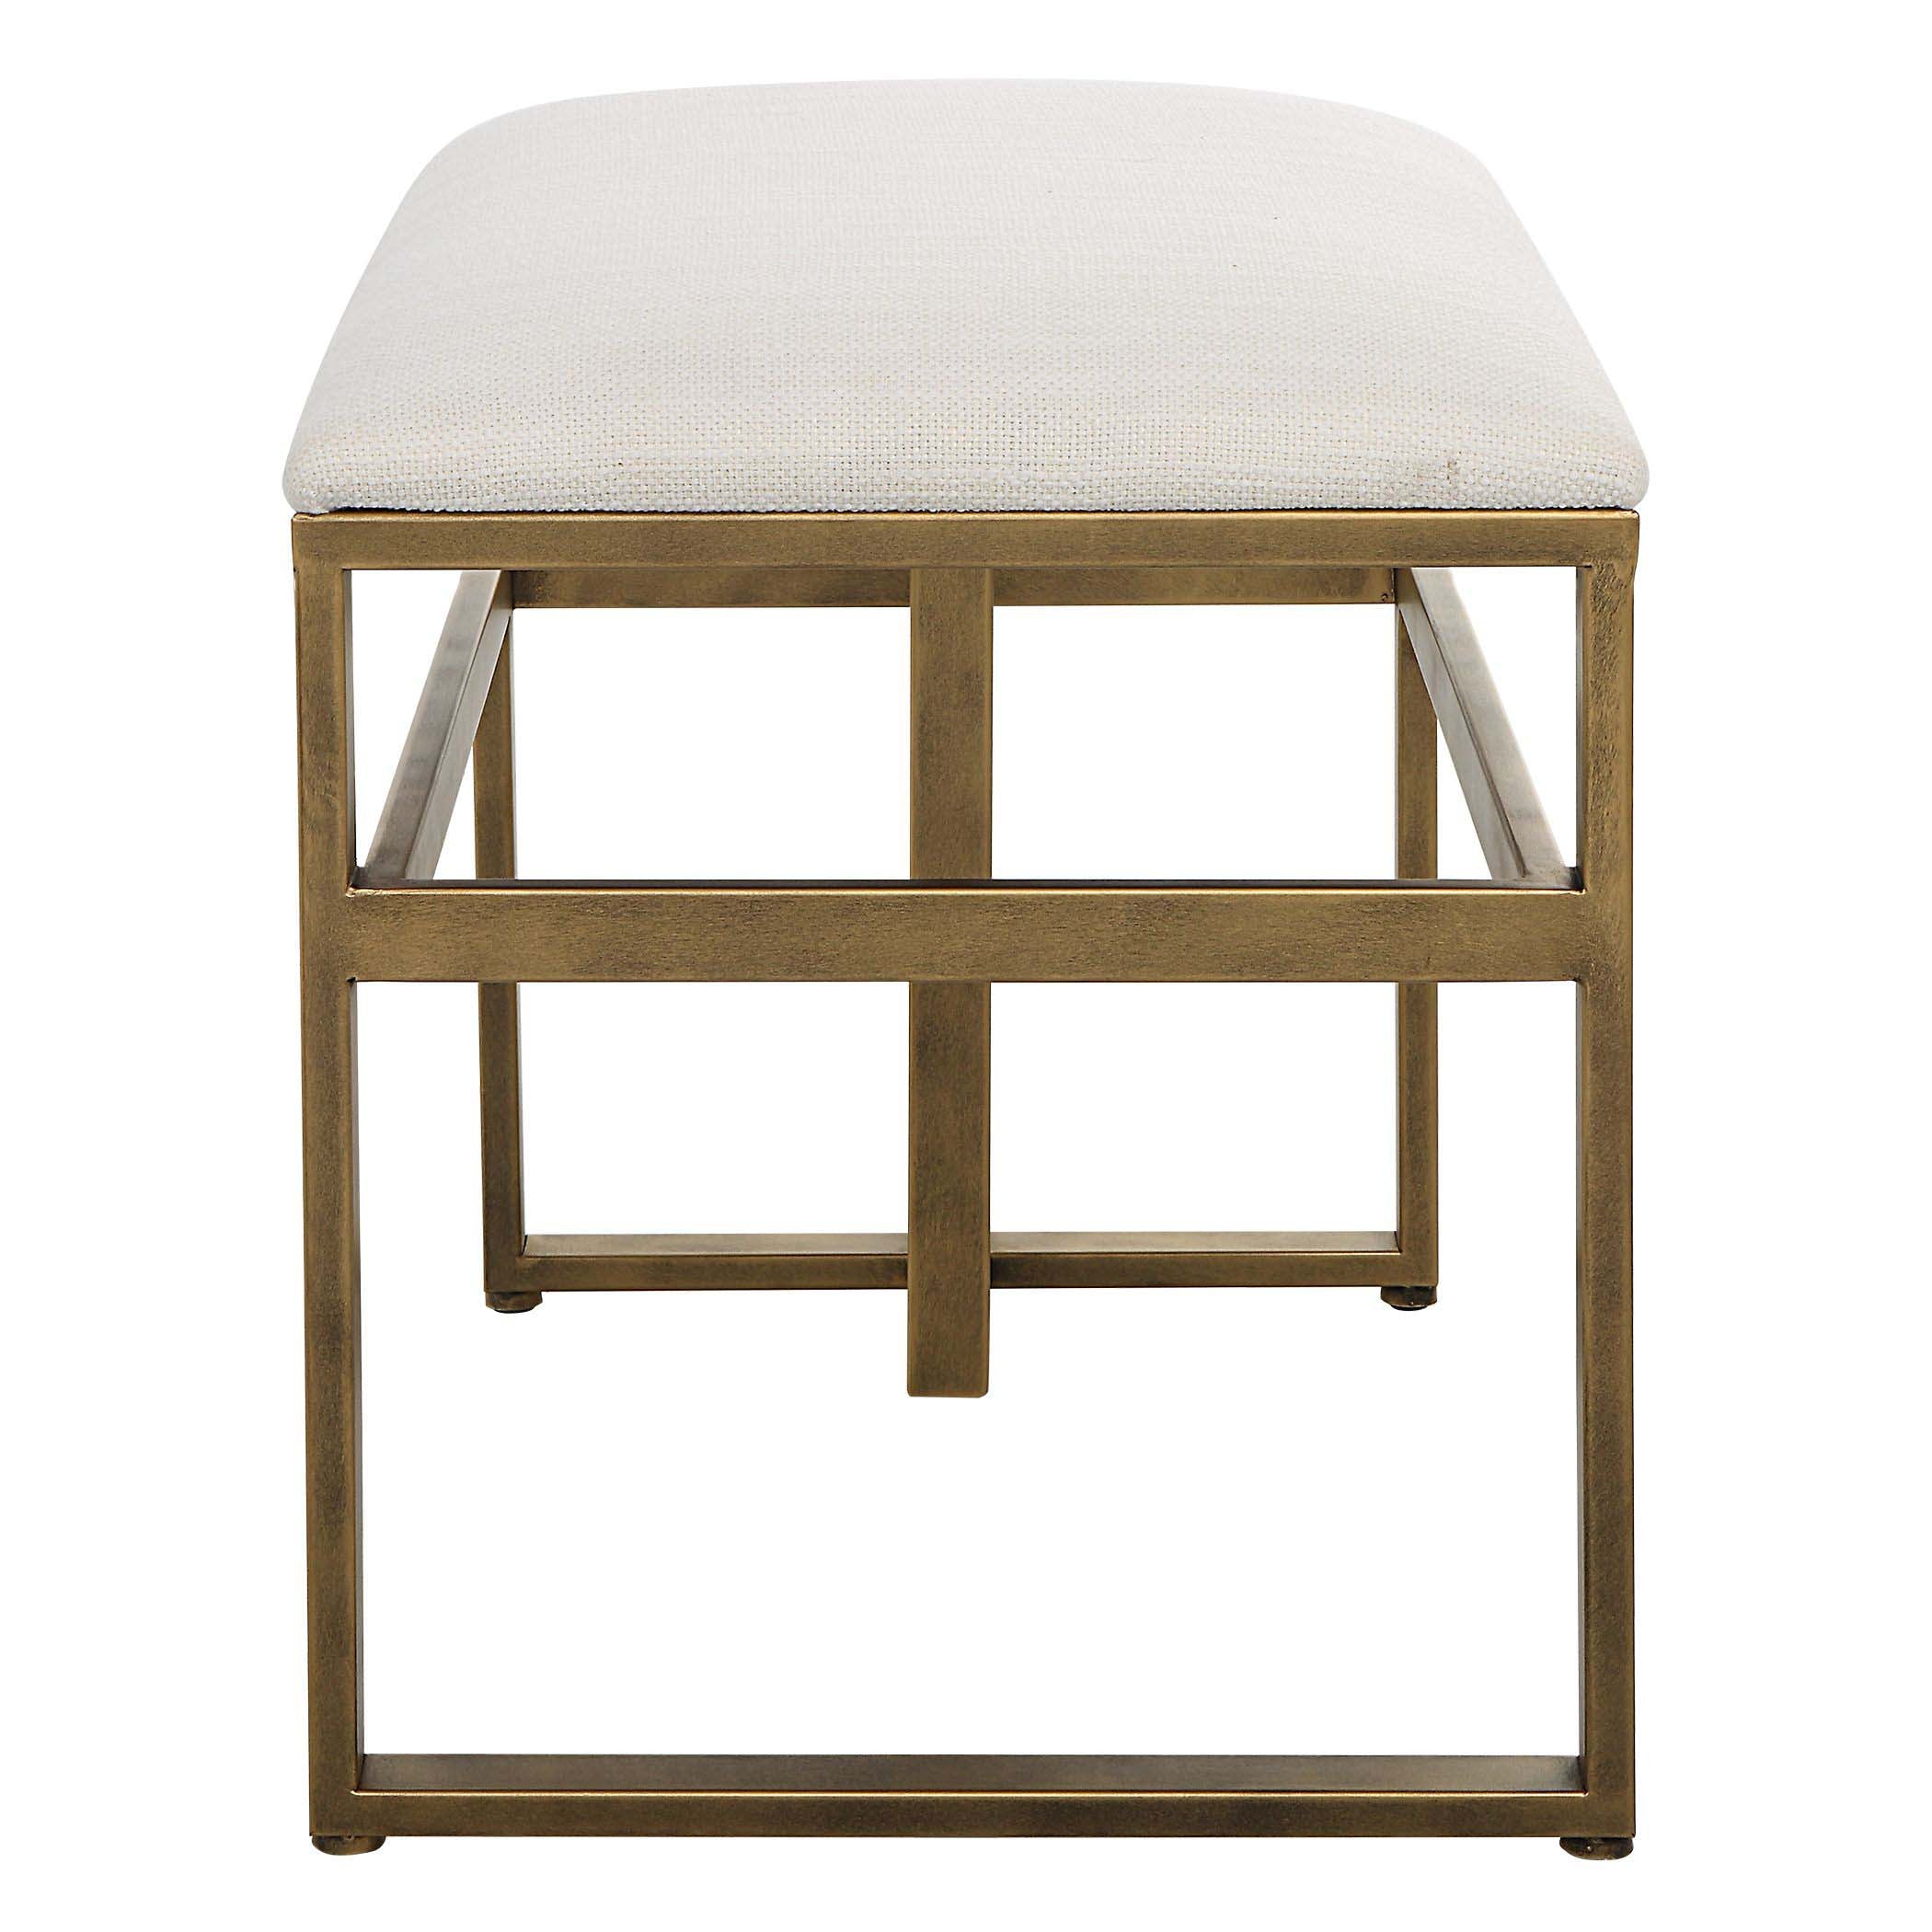 Antique Decor Market Accent Stool Brushed Brass